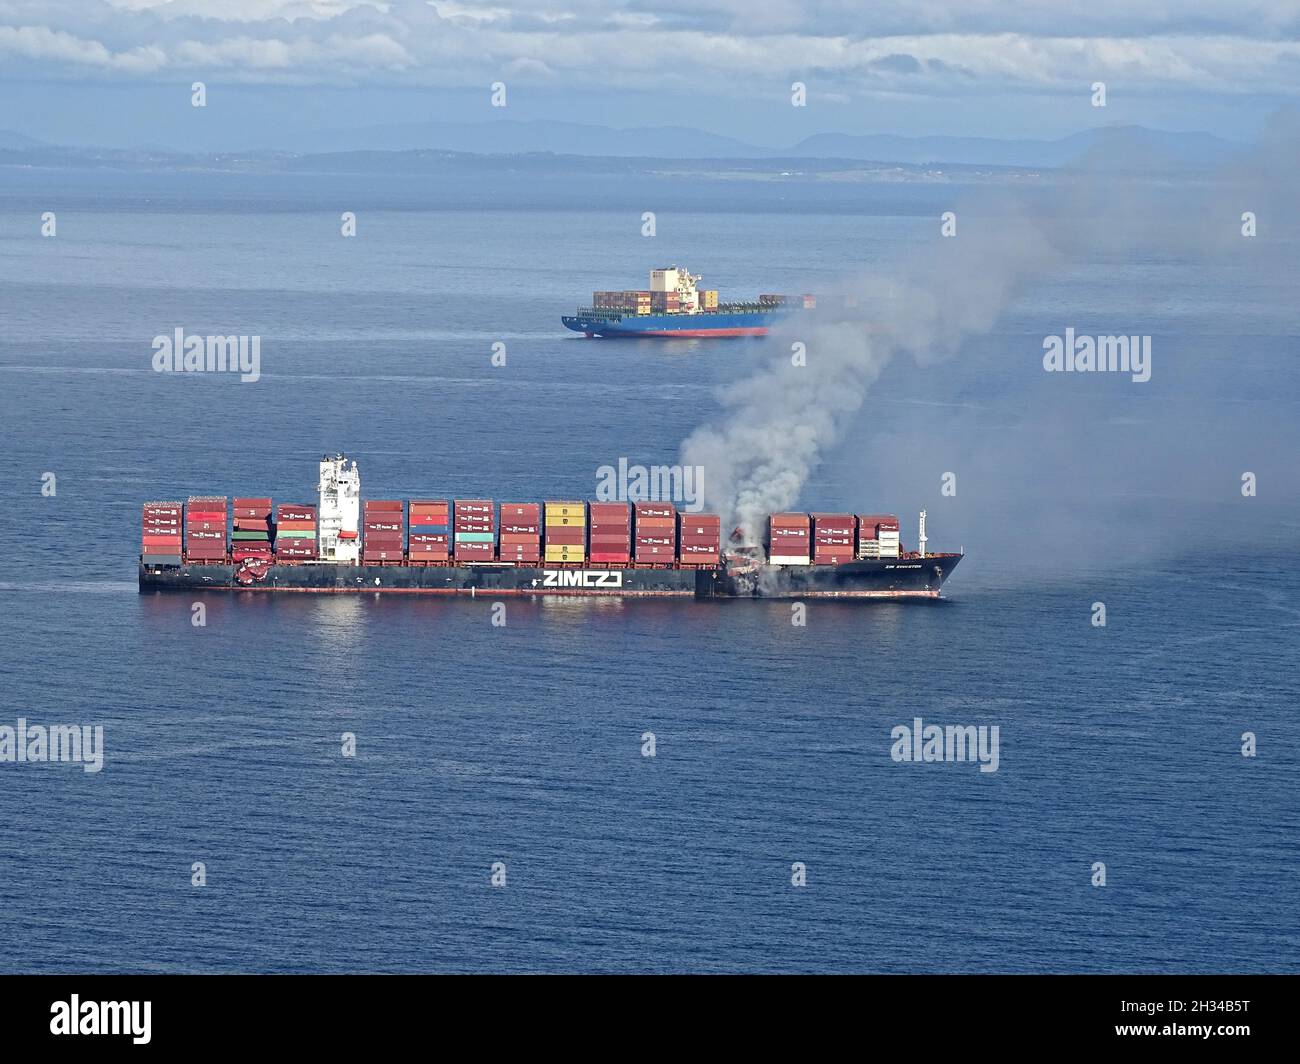 Victoria, Canada. 23rd Oct, 2021. The commercial cargo ship MV ZIM Kingston, burns after losing 40 shipping containers during transit in the Strait of Juan de Fuca October 23, 2021 near Victoria, British Columbia, Canada. The shipping containers were carrying potassium amylxanthate which ignited. Credit: PO3 Diolanda Caballero/U.S. Coast Guard/Alamy Live News Stock Photo